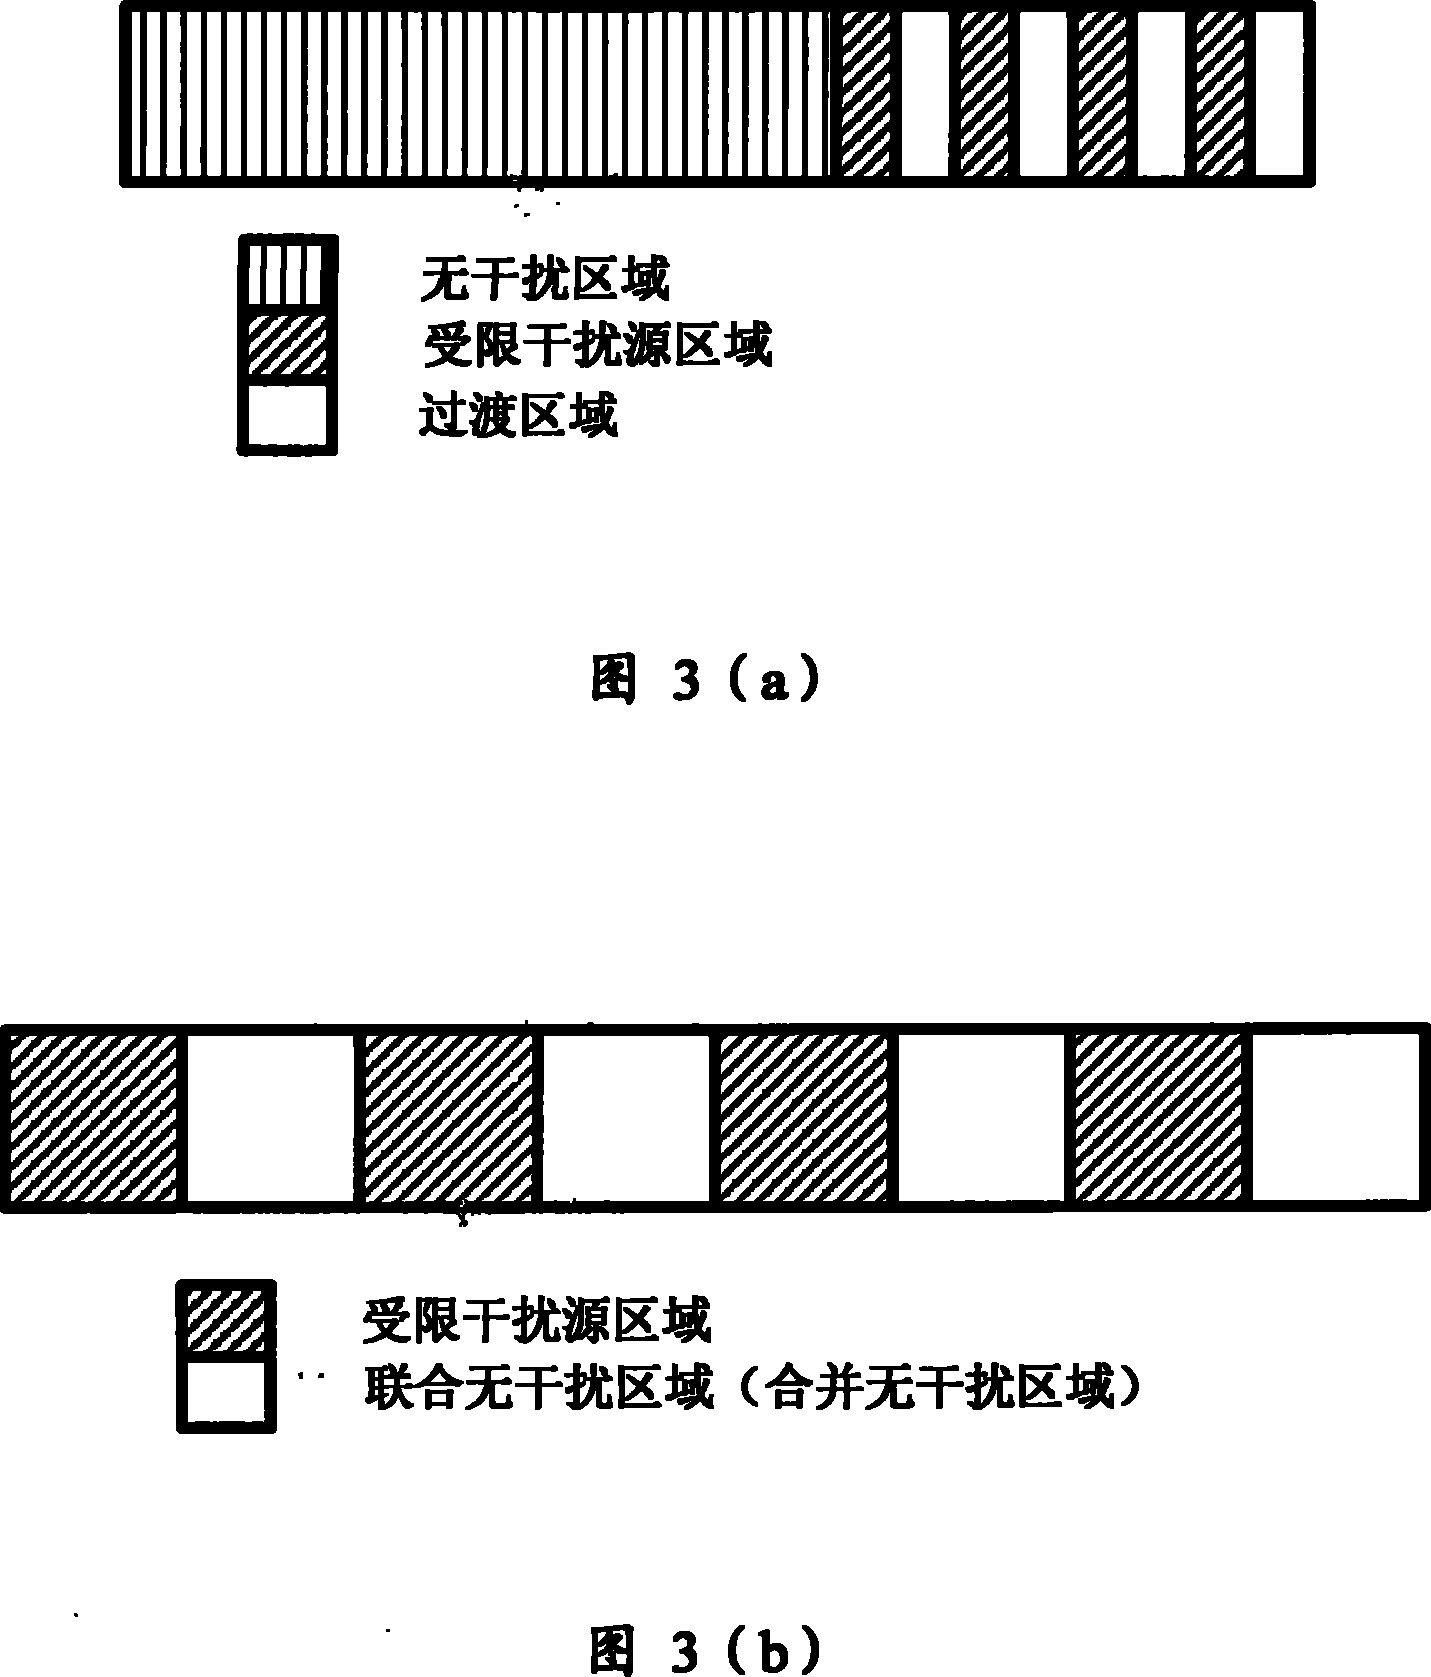 Method for coordinating interference between districts of relay wireless communication network